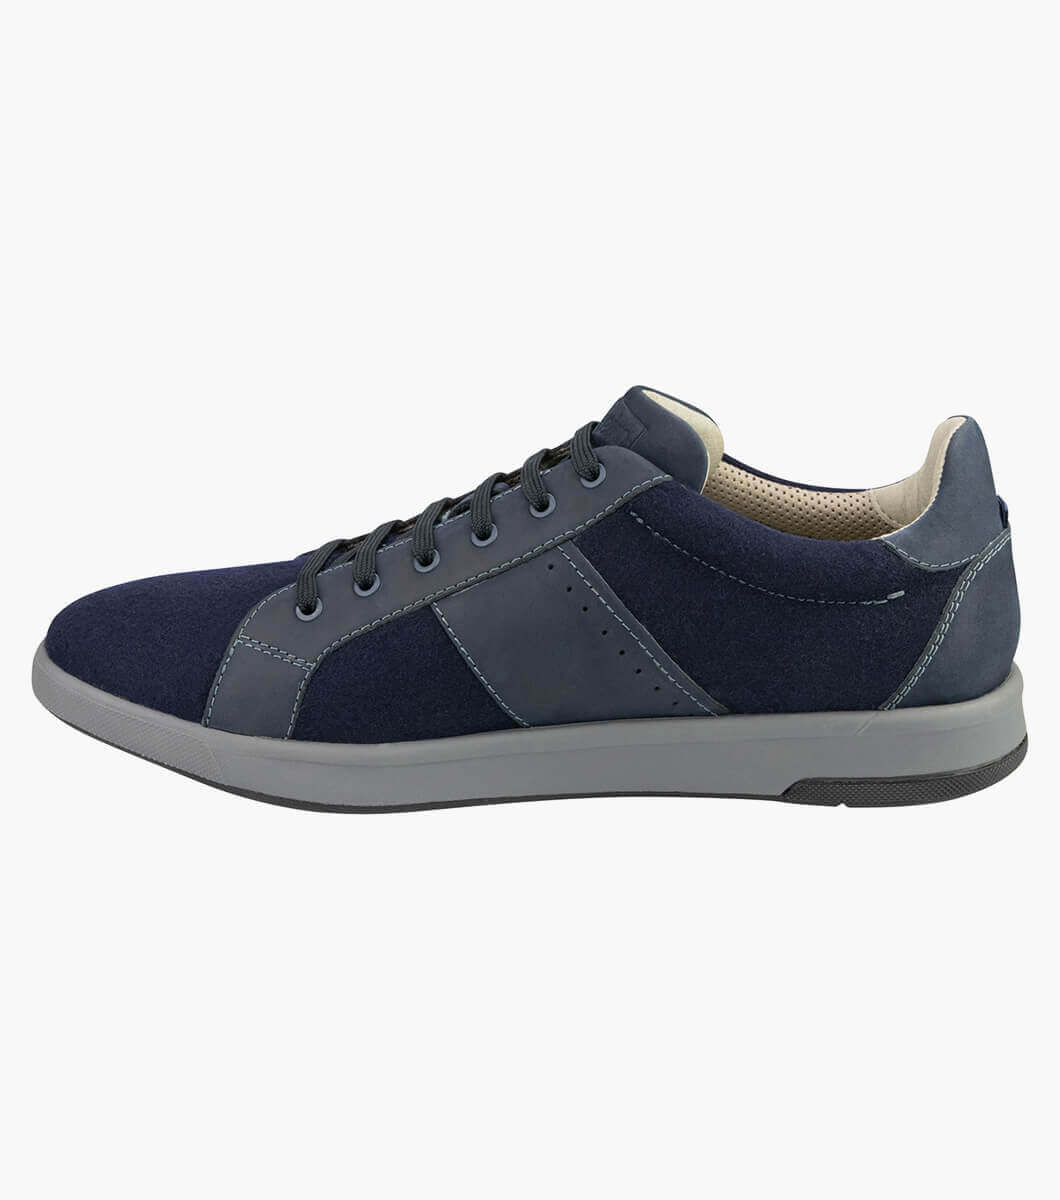 Crossover Wool Lace To Toe Sneaker Men's Sneakers | Florsheim.com